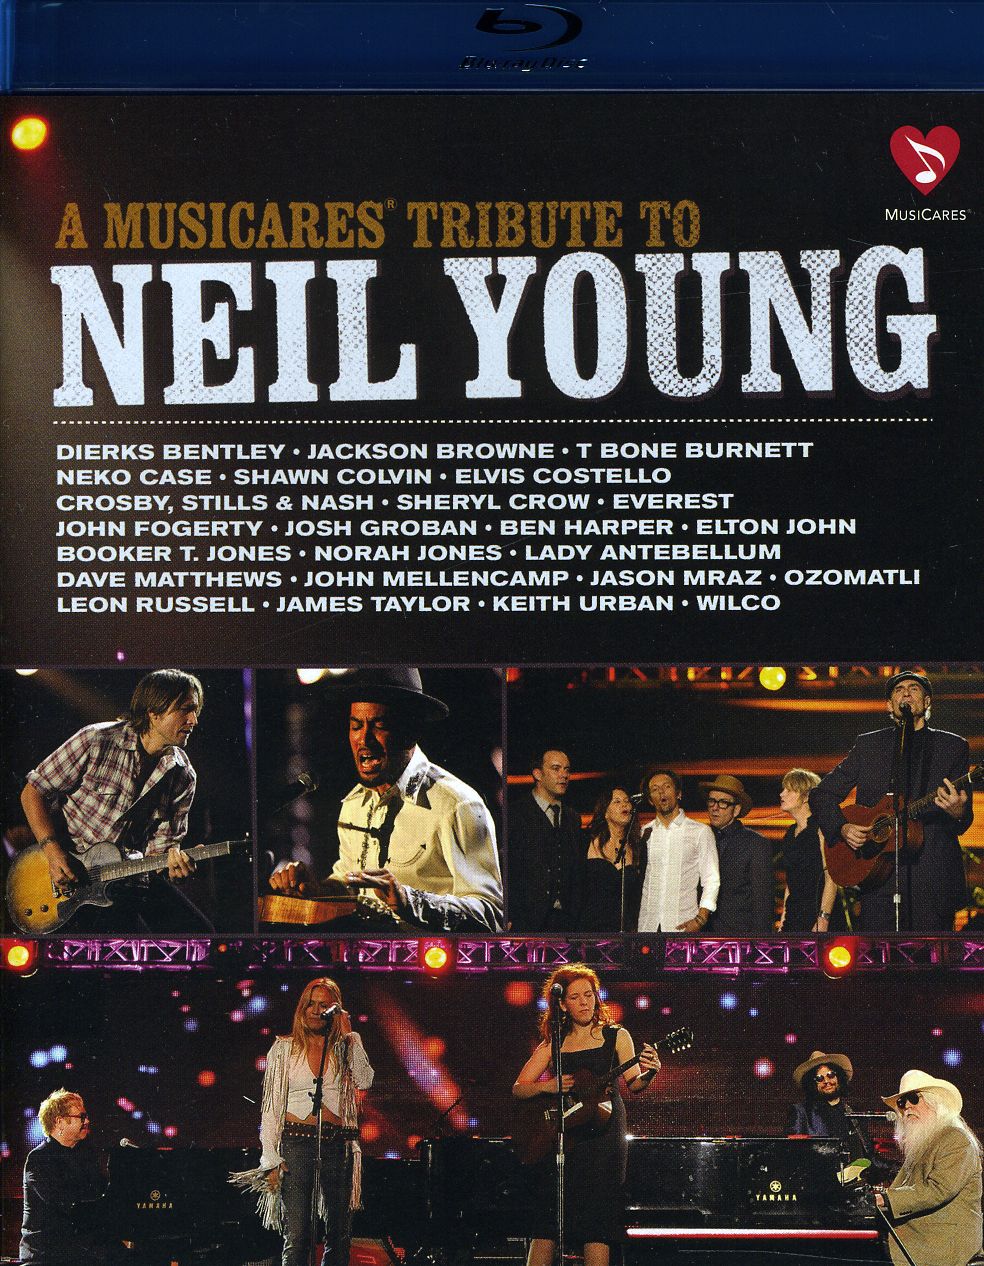 MUSICCARES TRIBUTE TO NEIL YOUNG / VARIOUS